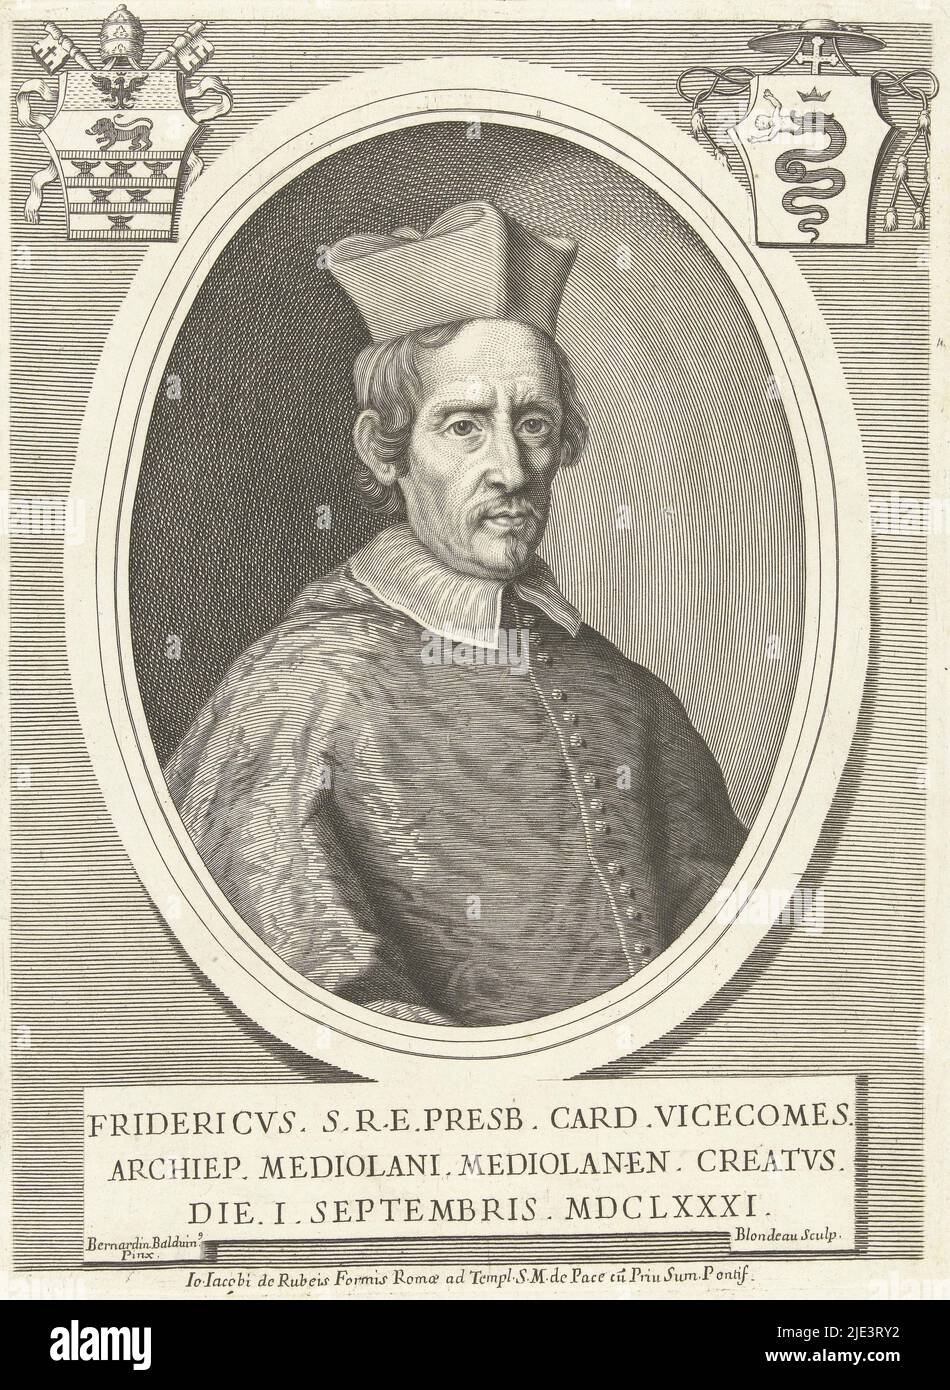 Portrait of Cardinal Federico Visconti Fridericvs SRE presb  die 1 septembris MDCLXXXI, print maker: Jacques Blondeau, (mentioned on object), after: Bernardino Baldi, (mentioned on object), publisher: Giovanni Giacomo de'Rossi, (mentioned on object), print maker: unknown, publisher: Rome, 1681 - 1698, paper, engraving, h 207 mm × w 151 mm Stock Photo